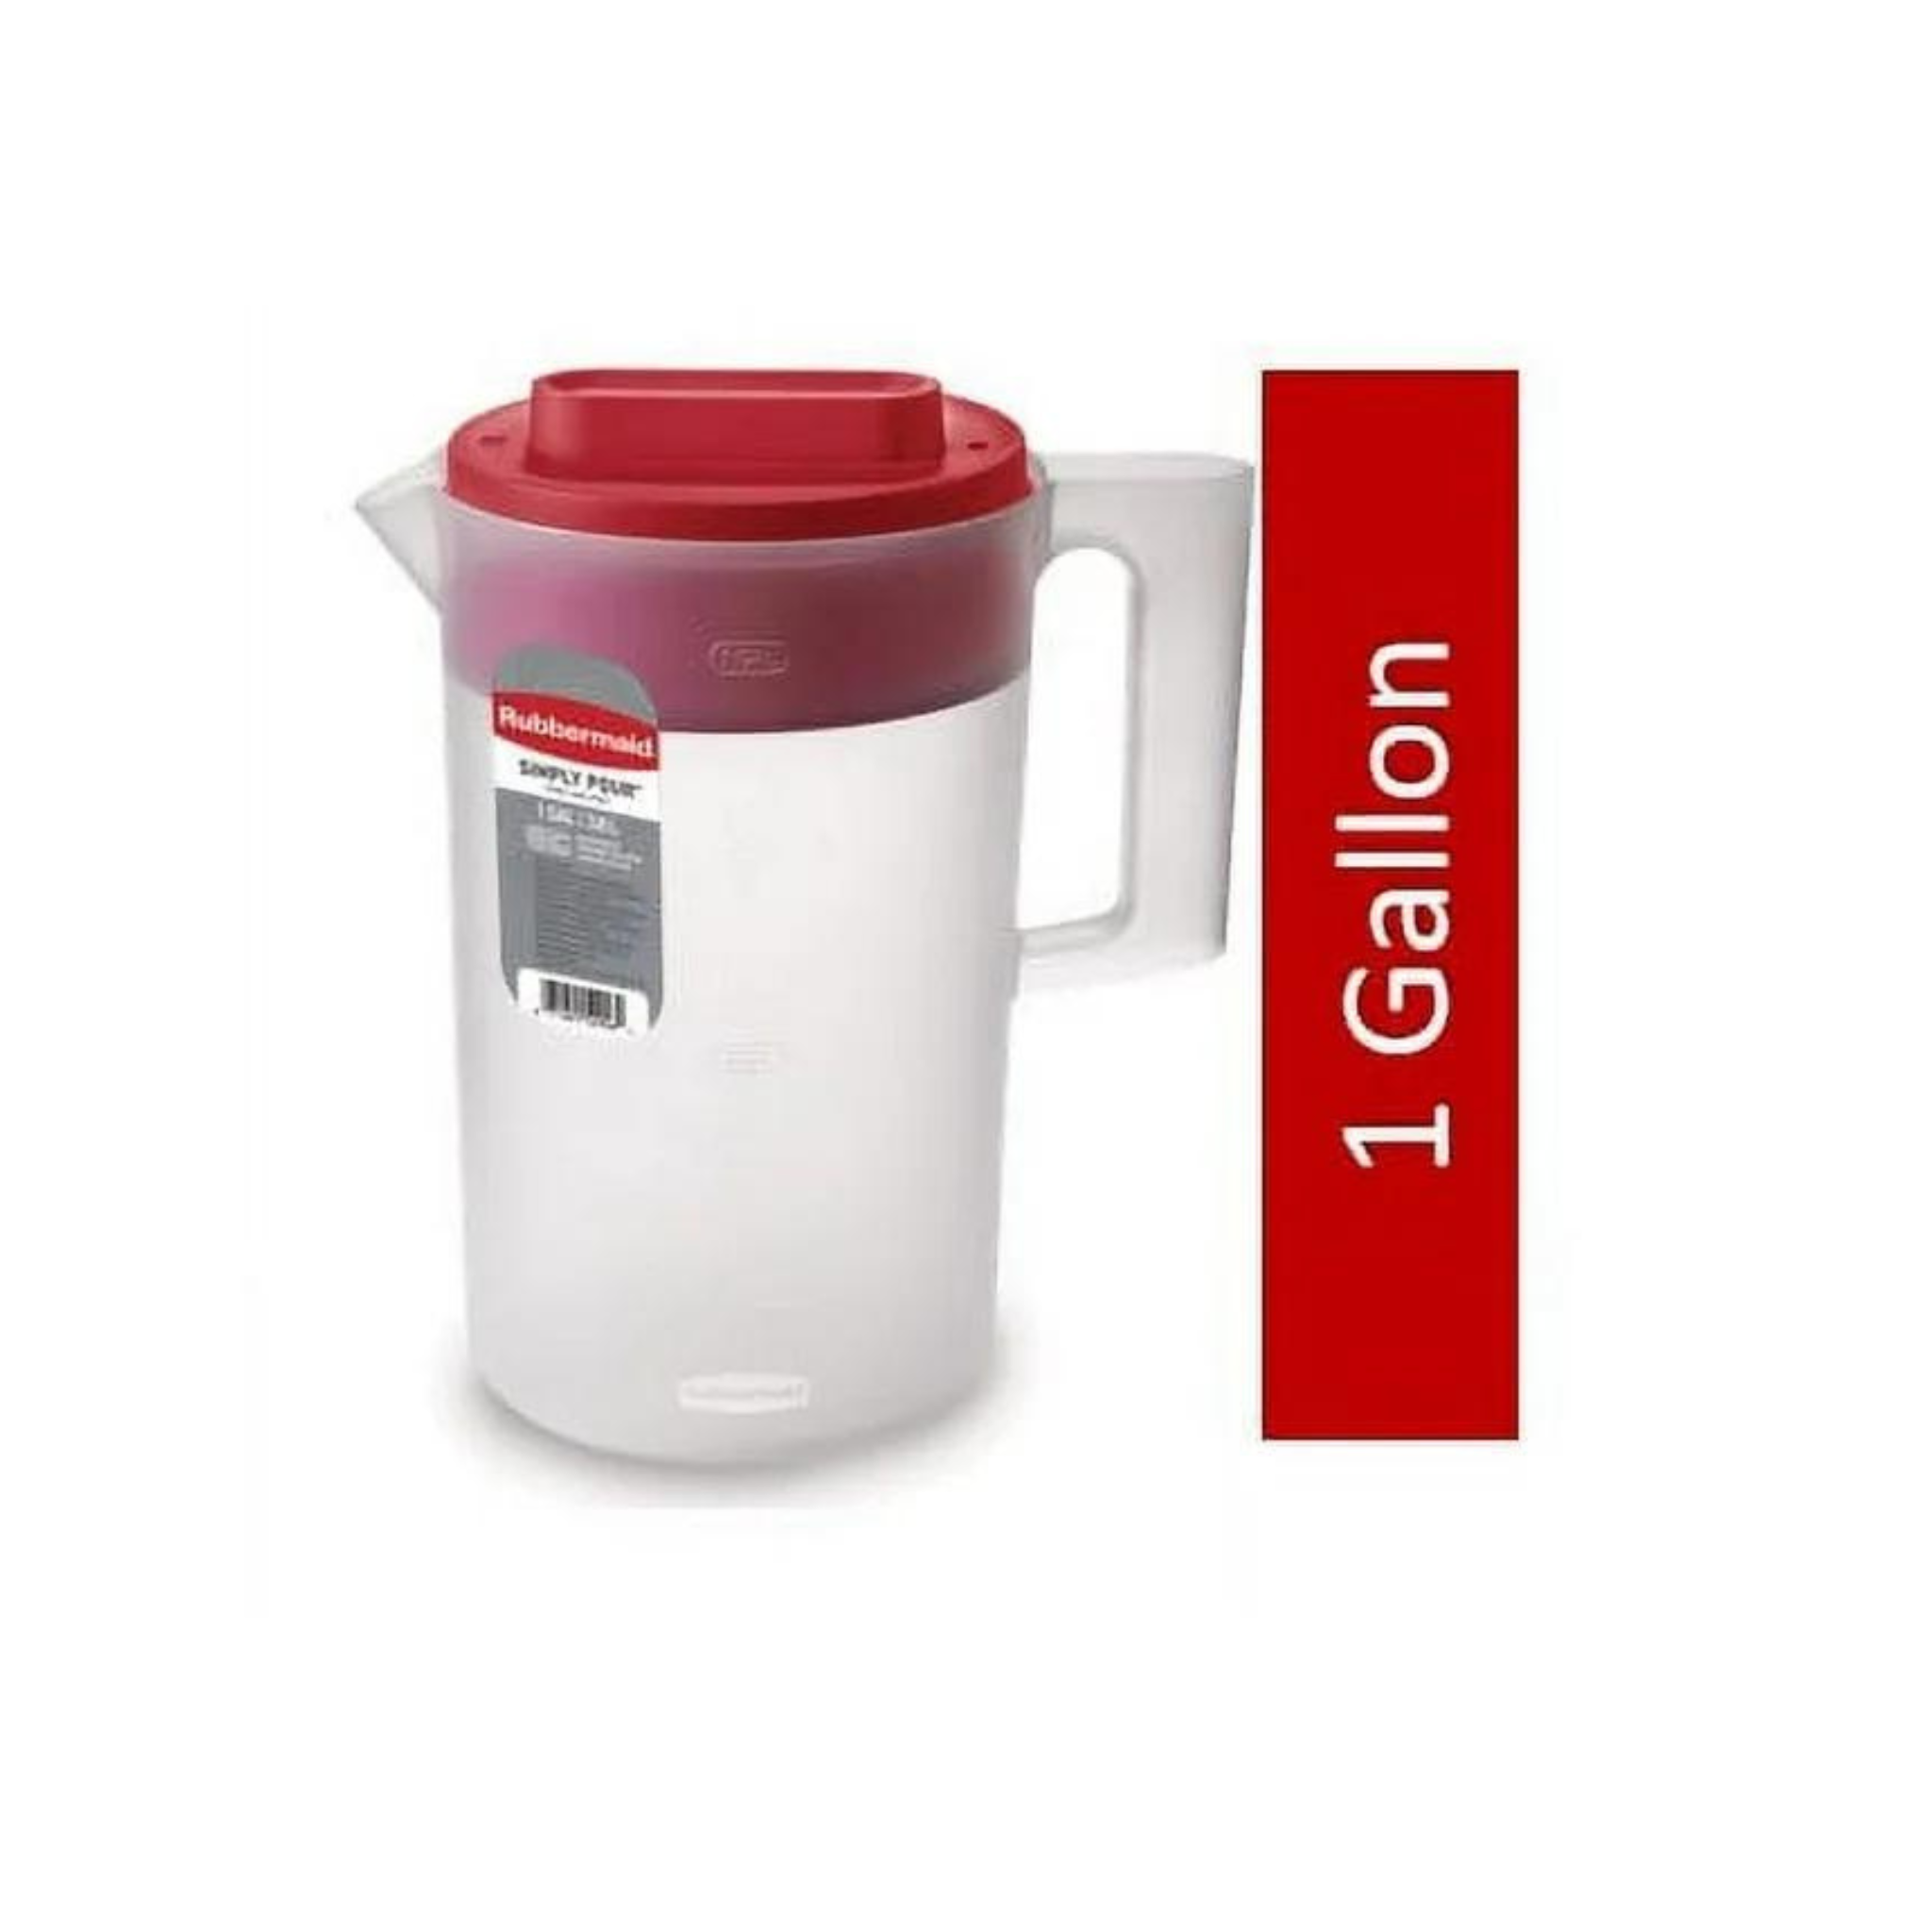 1-Gal Rubbermaid Simply Pour Plastic Pitcher w/ Multifunction Lid